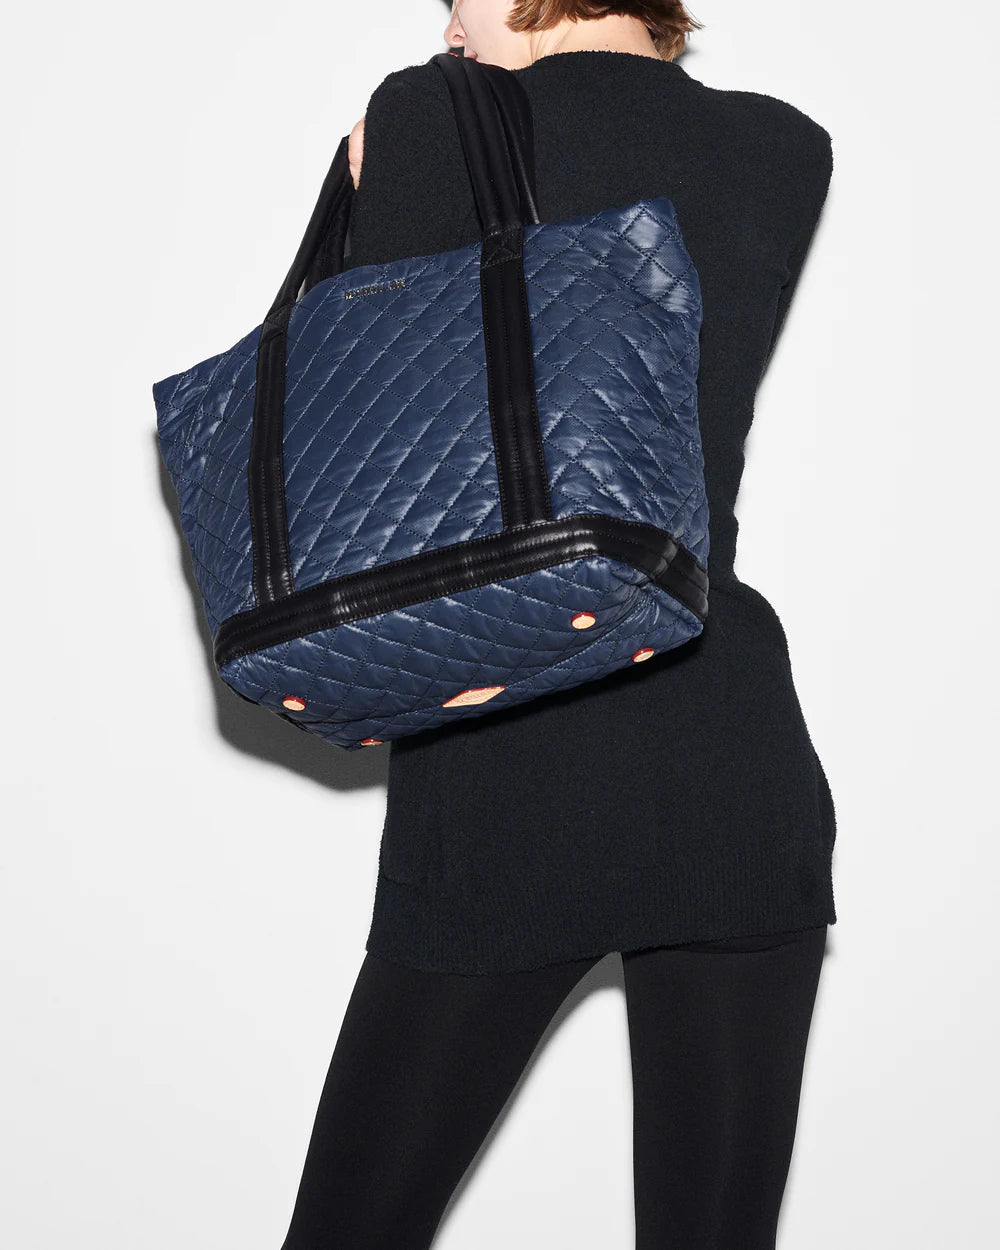 MZ WALLACE MEDIUM EMPIRE TOTE IN NAVY AND BLACK